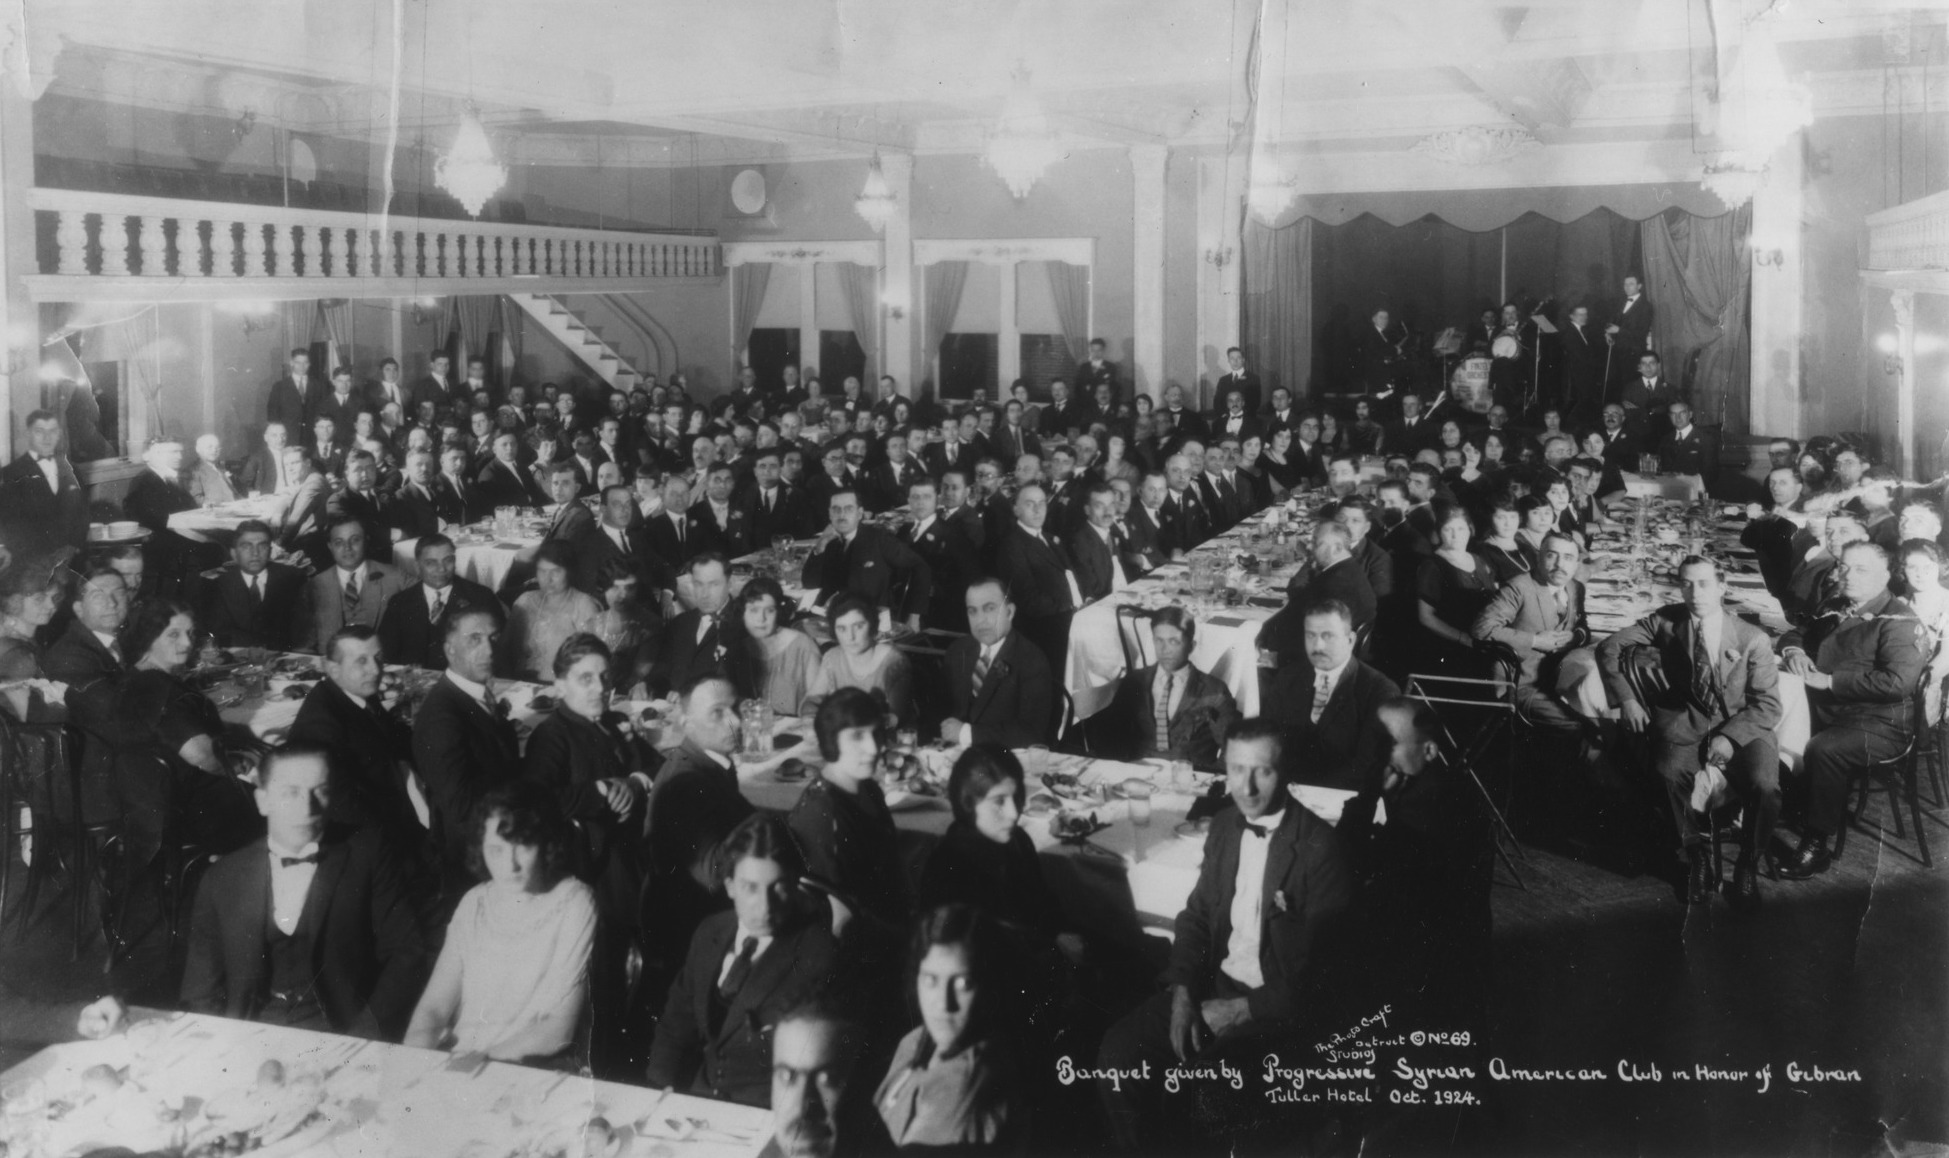 Banquet given by Progressive Syrian American Club in honor of Khalil Gibran October 1924 Smithsonian Institution